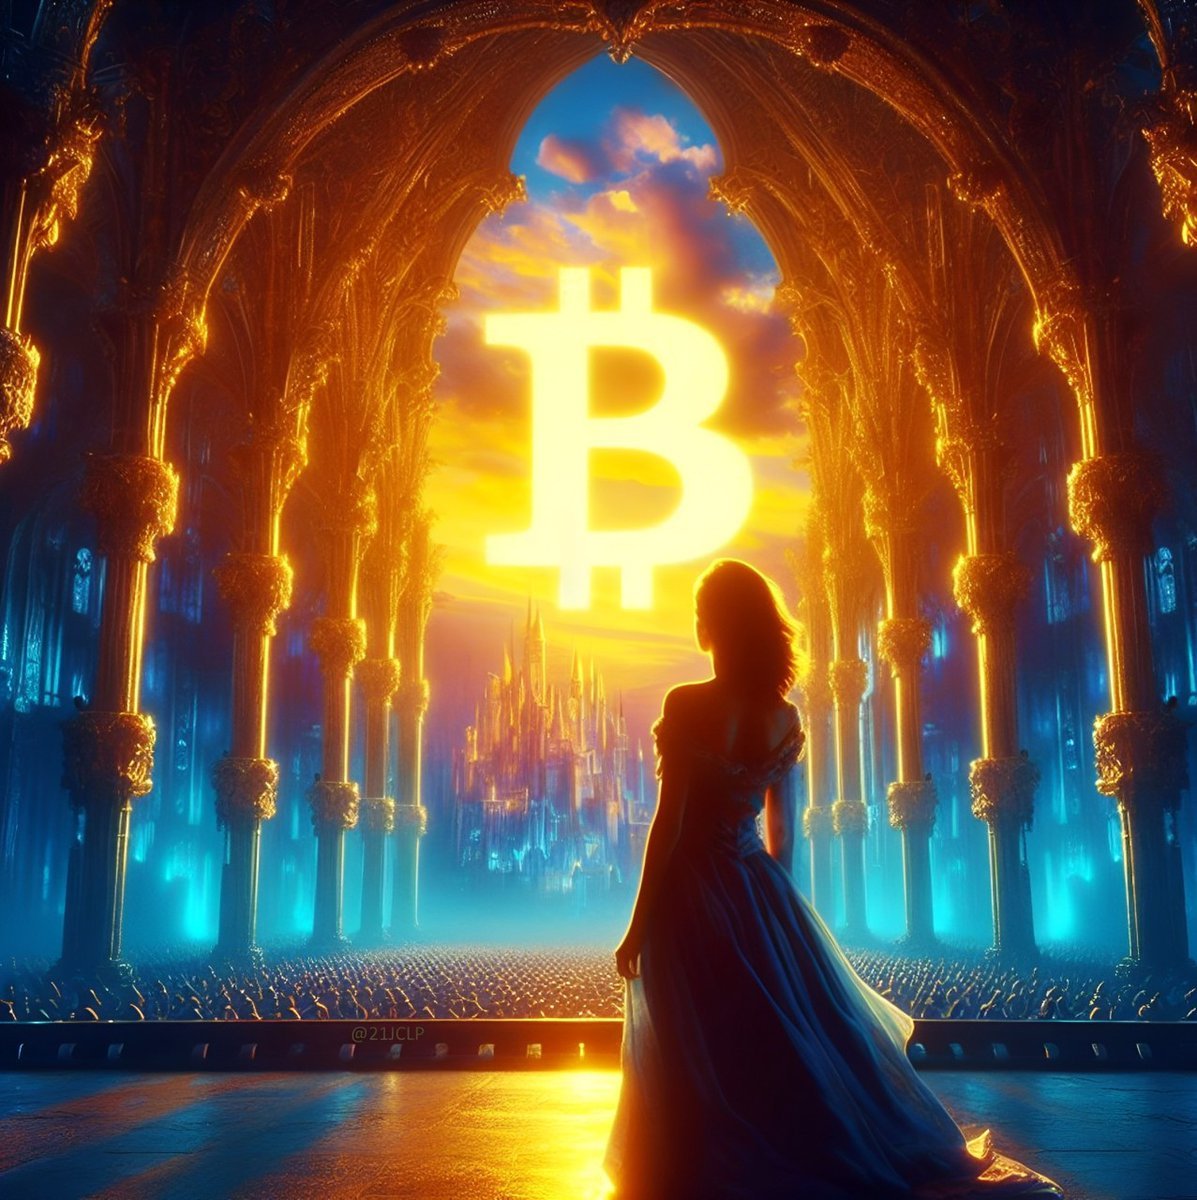 See the Light. #Bitcoin